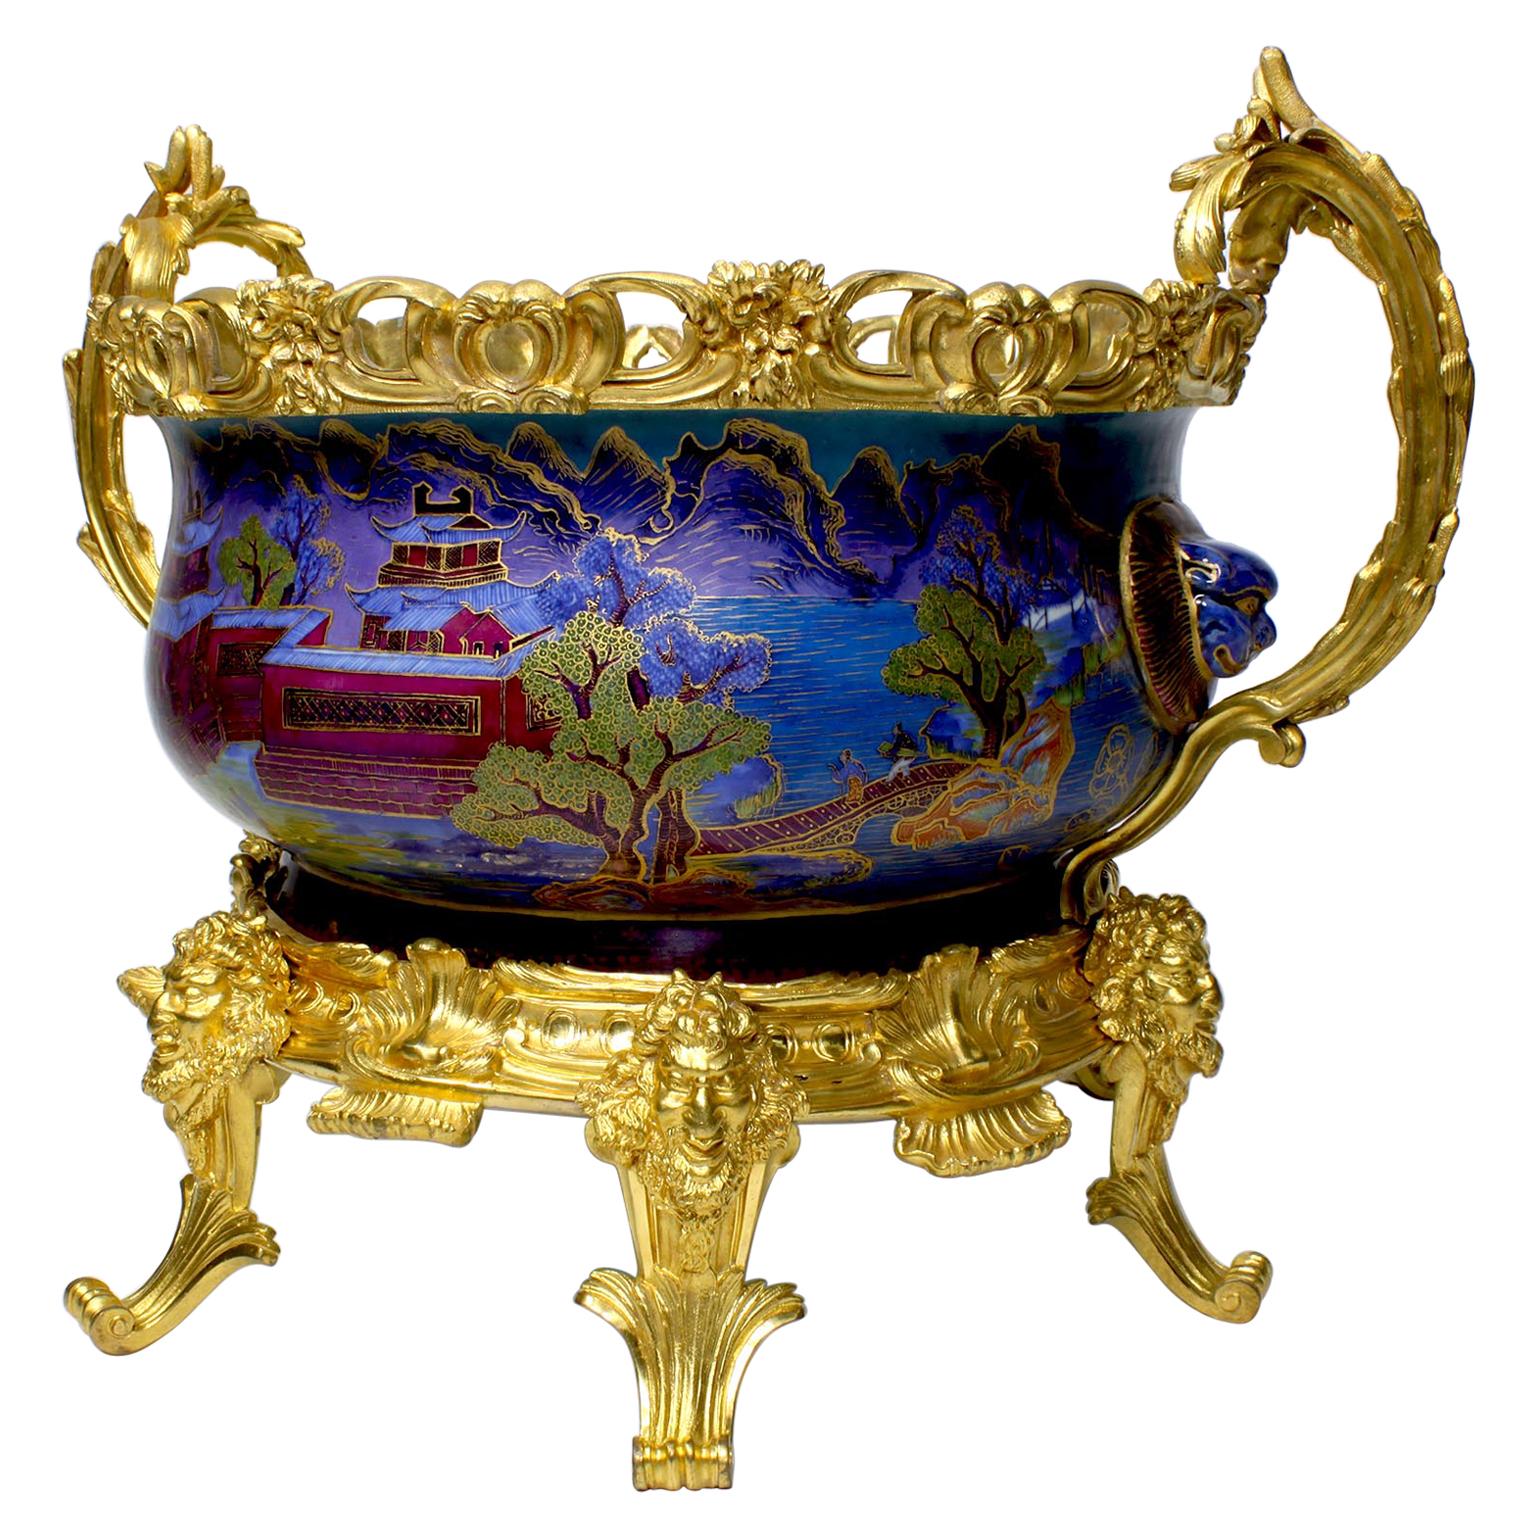 Chinese Export Famille Verte Porcelain & French Ormolu Chinoiserie Centerpiece